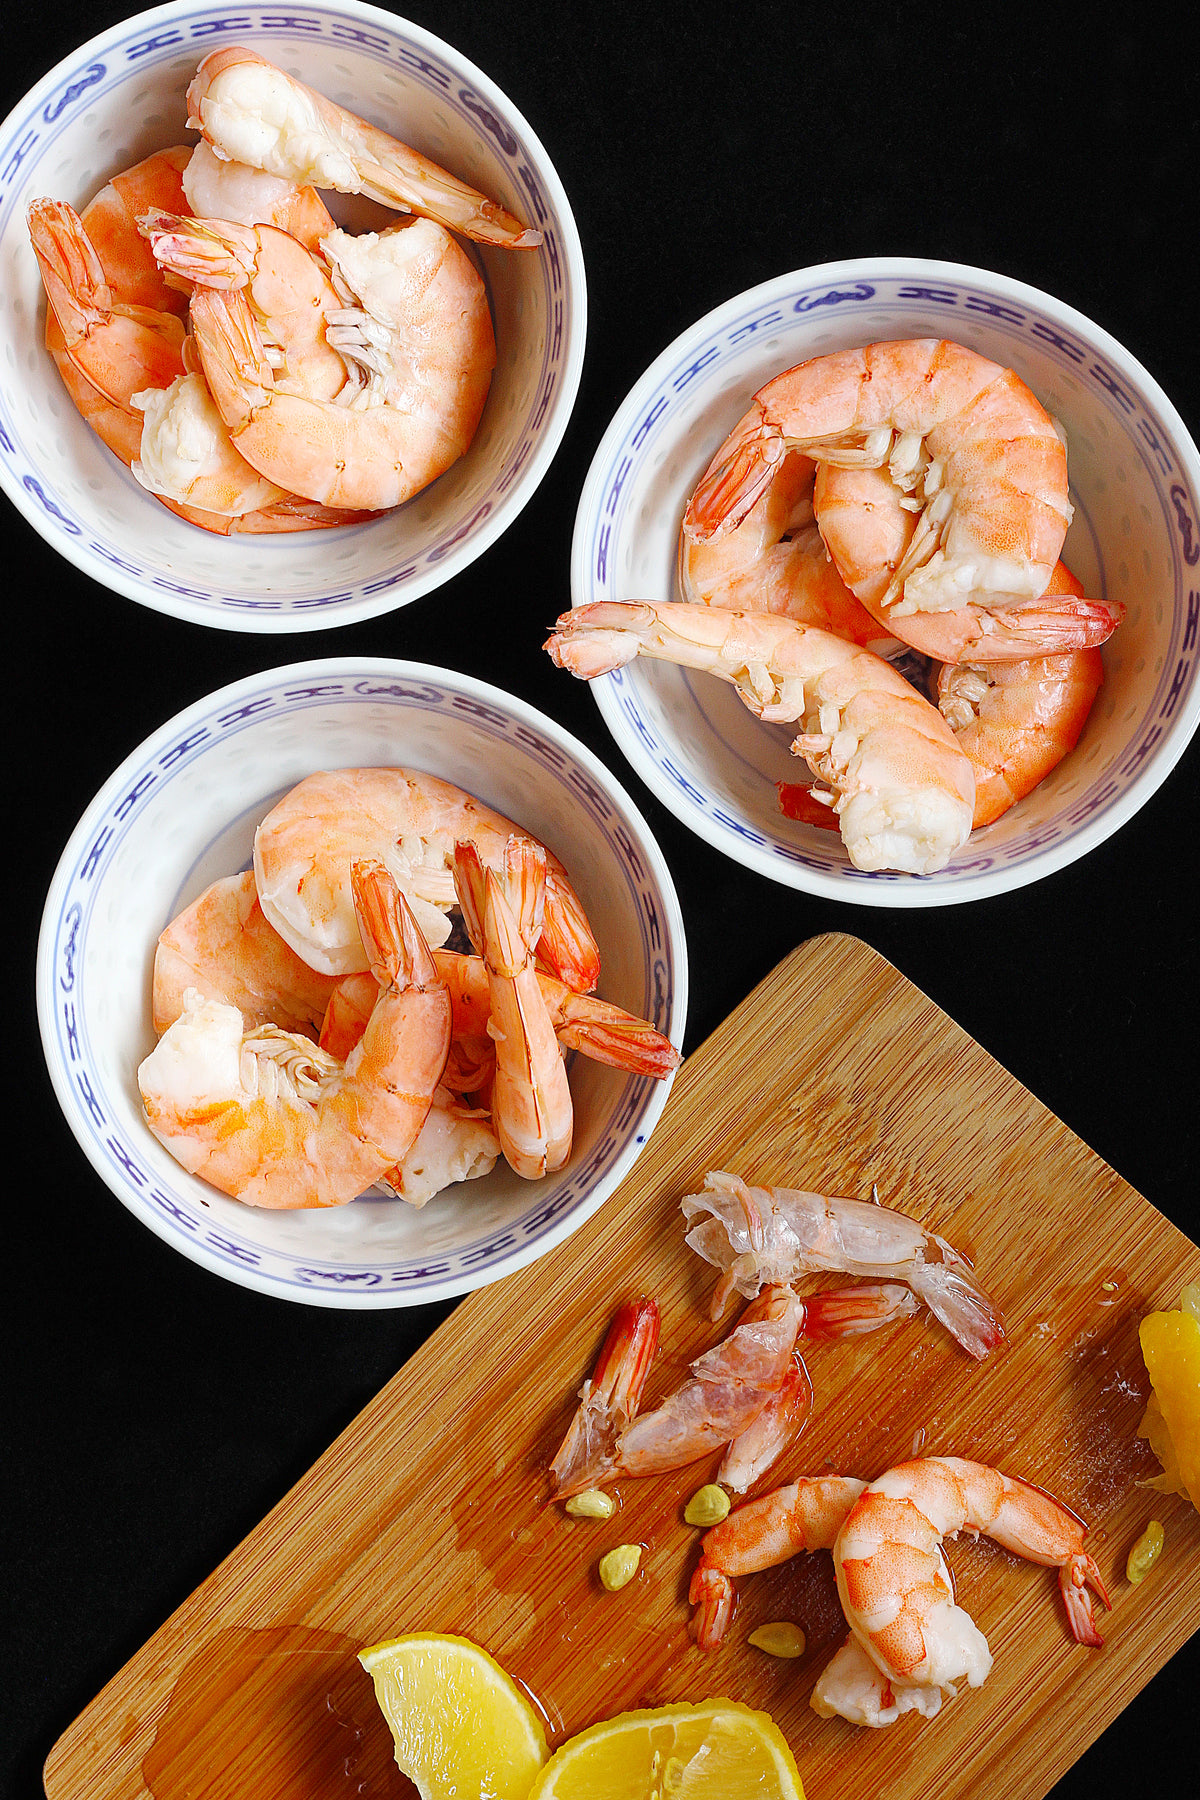 cooked shrimp dressed with lemon juice in china bowls